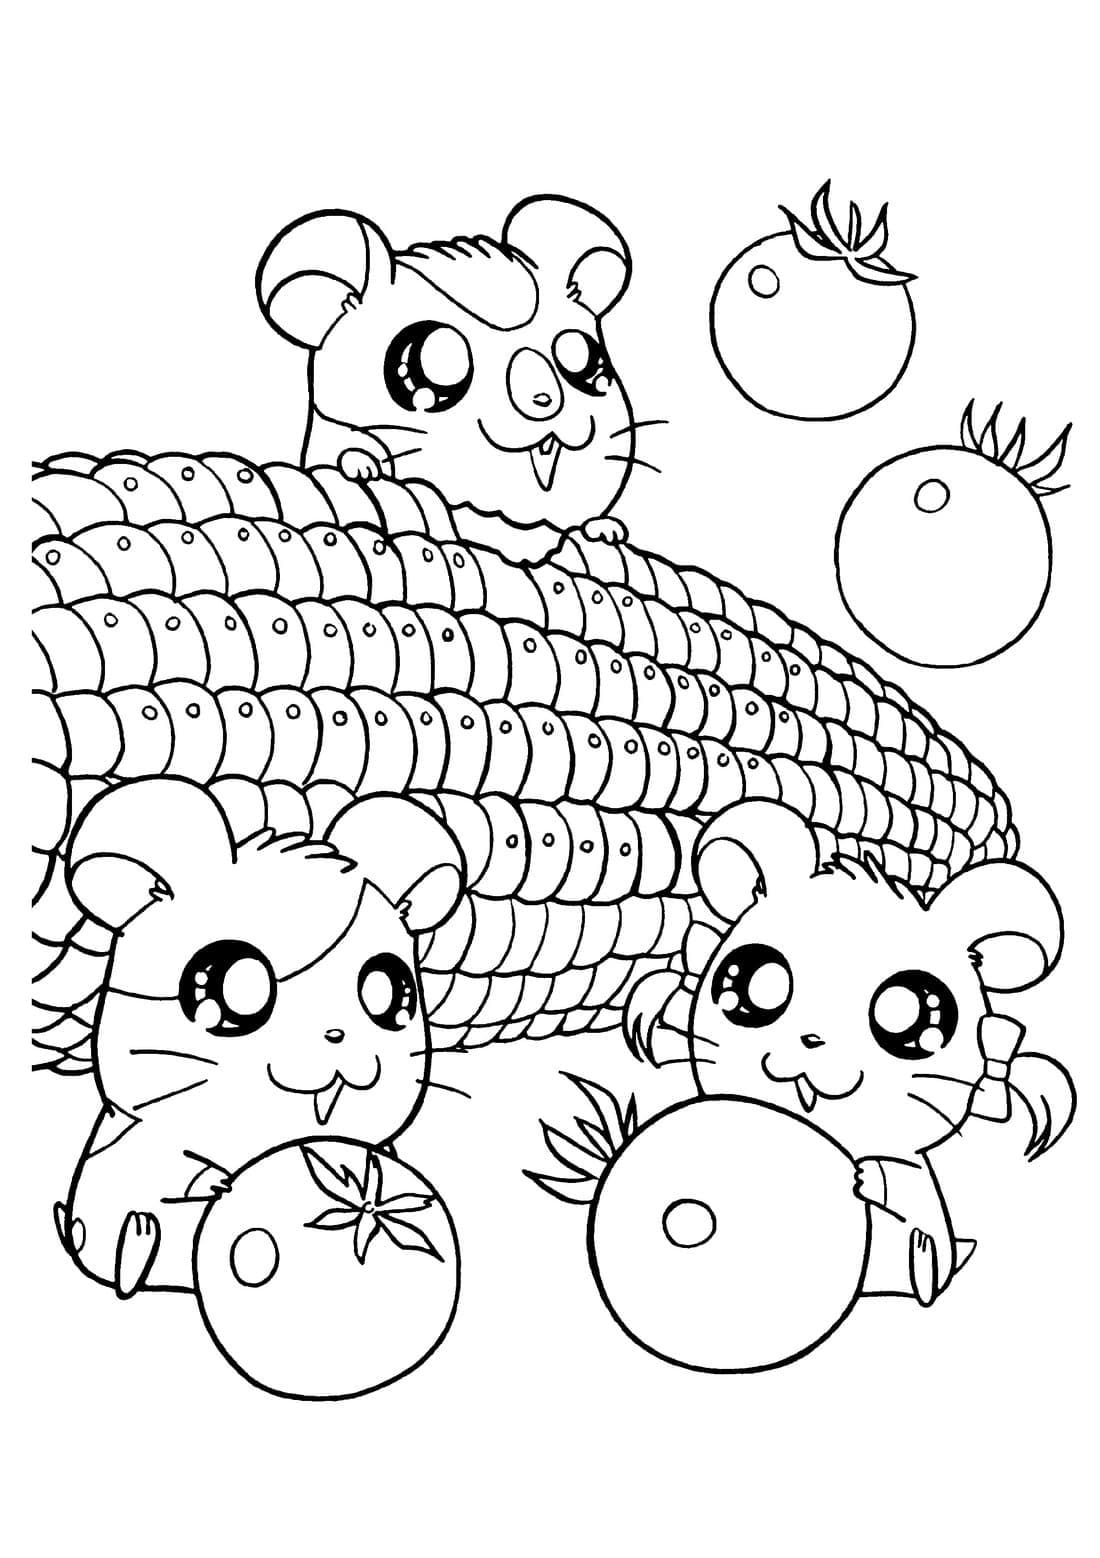 Hamster Coloring Pages | 100 Pictures Free Printable